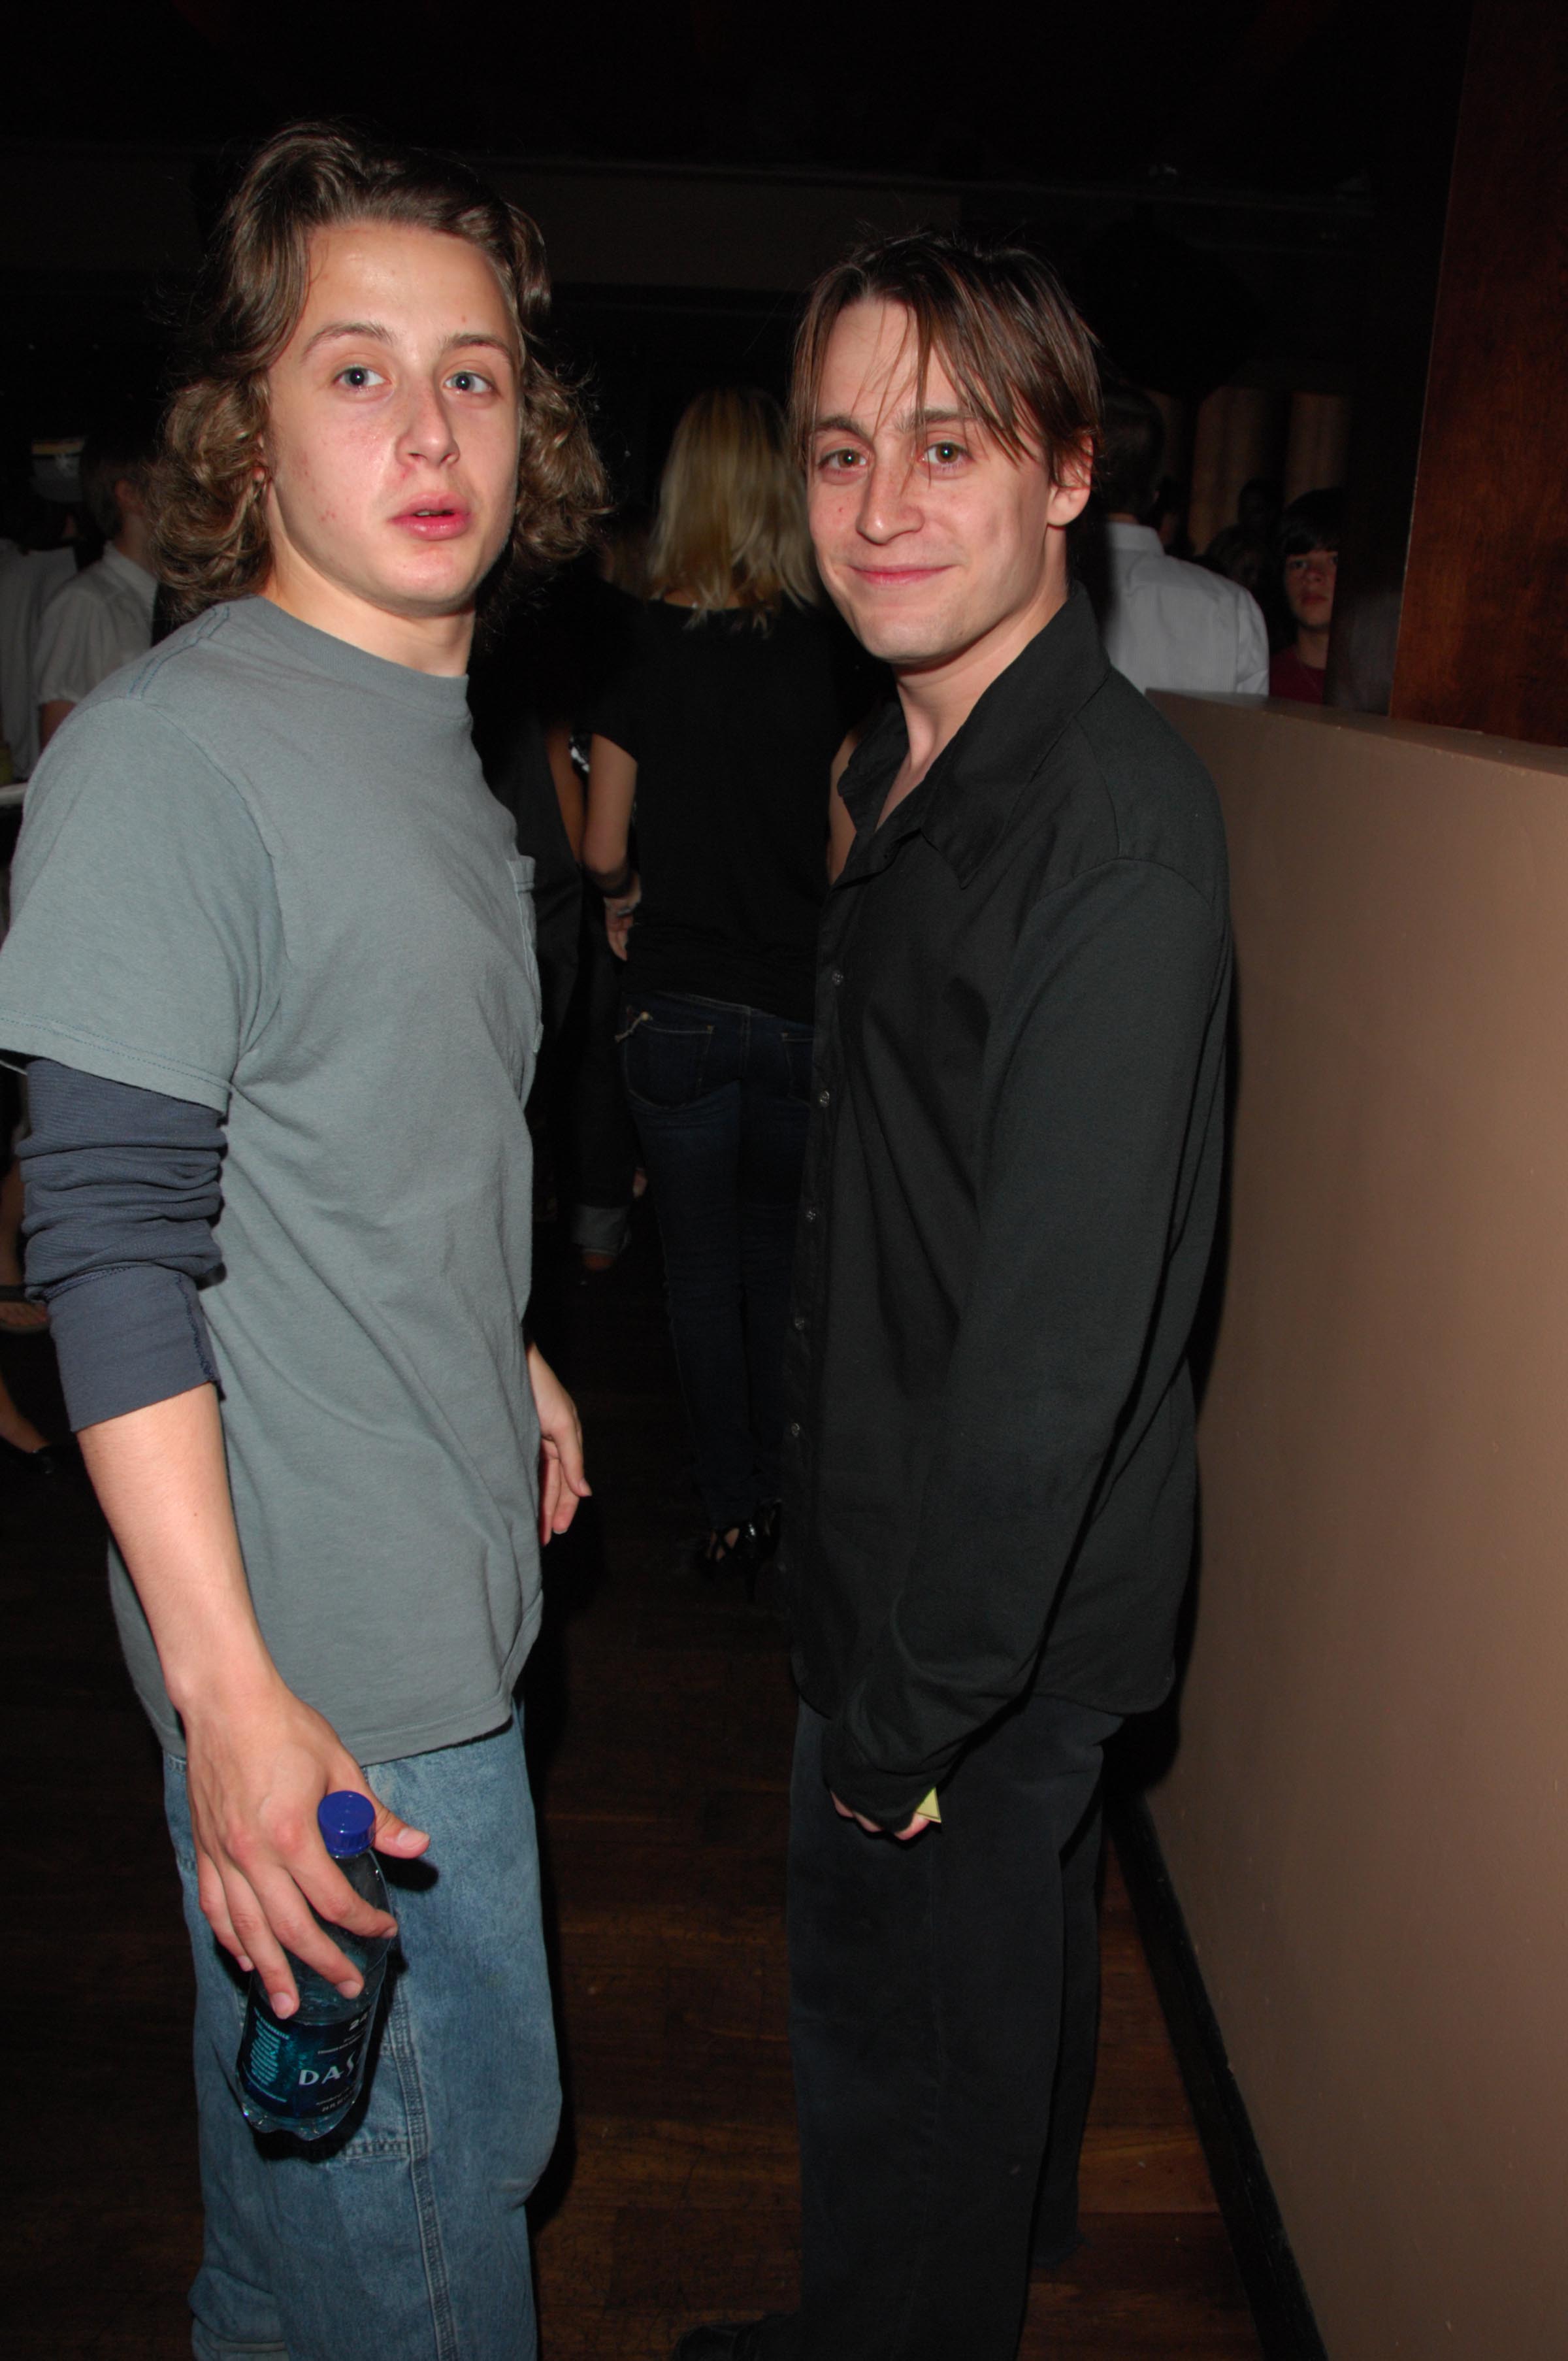  Kieran Culkin and Kit Culkin are pictured at Three Olives presents "Pineapple Express" screening arrivals and after-party at AMC Loews and Tenjune NYC on August 5, 2008 | Source: Getty Images